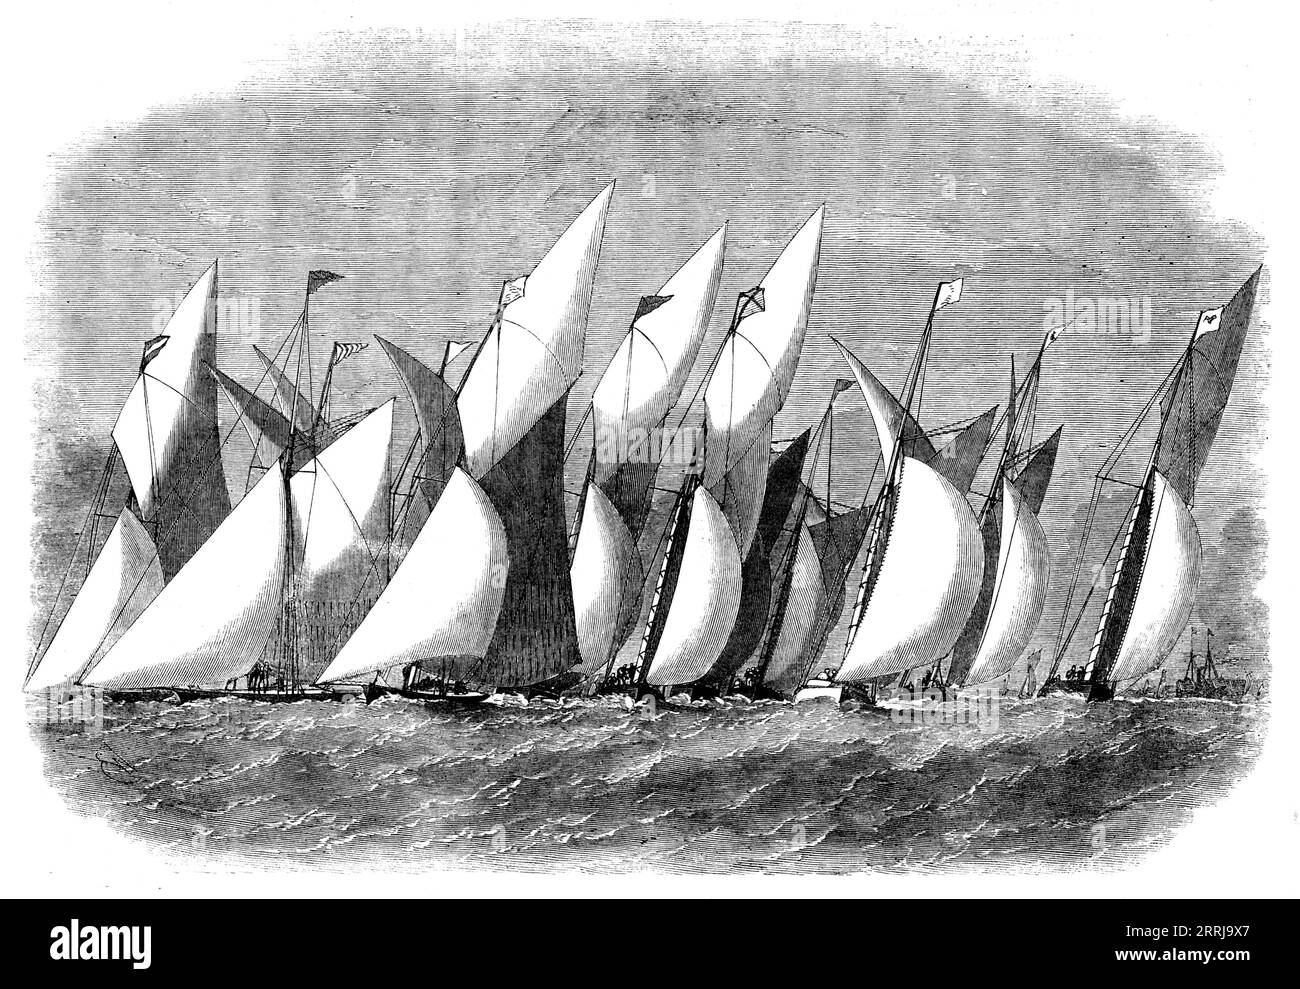 The Royal Thames Yacht Club Match, 1858. 'Whisper; Undine; Zuleika; Oriole; Julia; Dart; Violet, Midge; Silver Star; Emily; Pearl; Vampire...The signal for getting under way was fired by direction of the noble Commodore at 11.33, at which time there was a good breeze from the westward, with a trifle of south in it. They all canted at the same moment, and set their sails with great alacrity, forming one of the prettiest and most imposing starts we ever witnessed...the leading trio above Gravesend...were found nearly becalmed, the wind, which had again shifted to the northward, having died off. Stock Photo